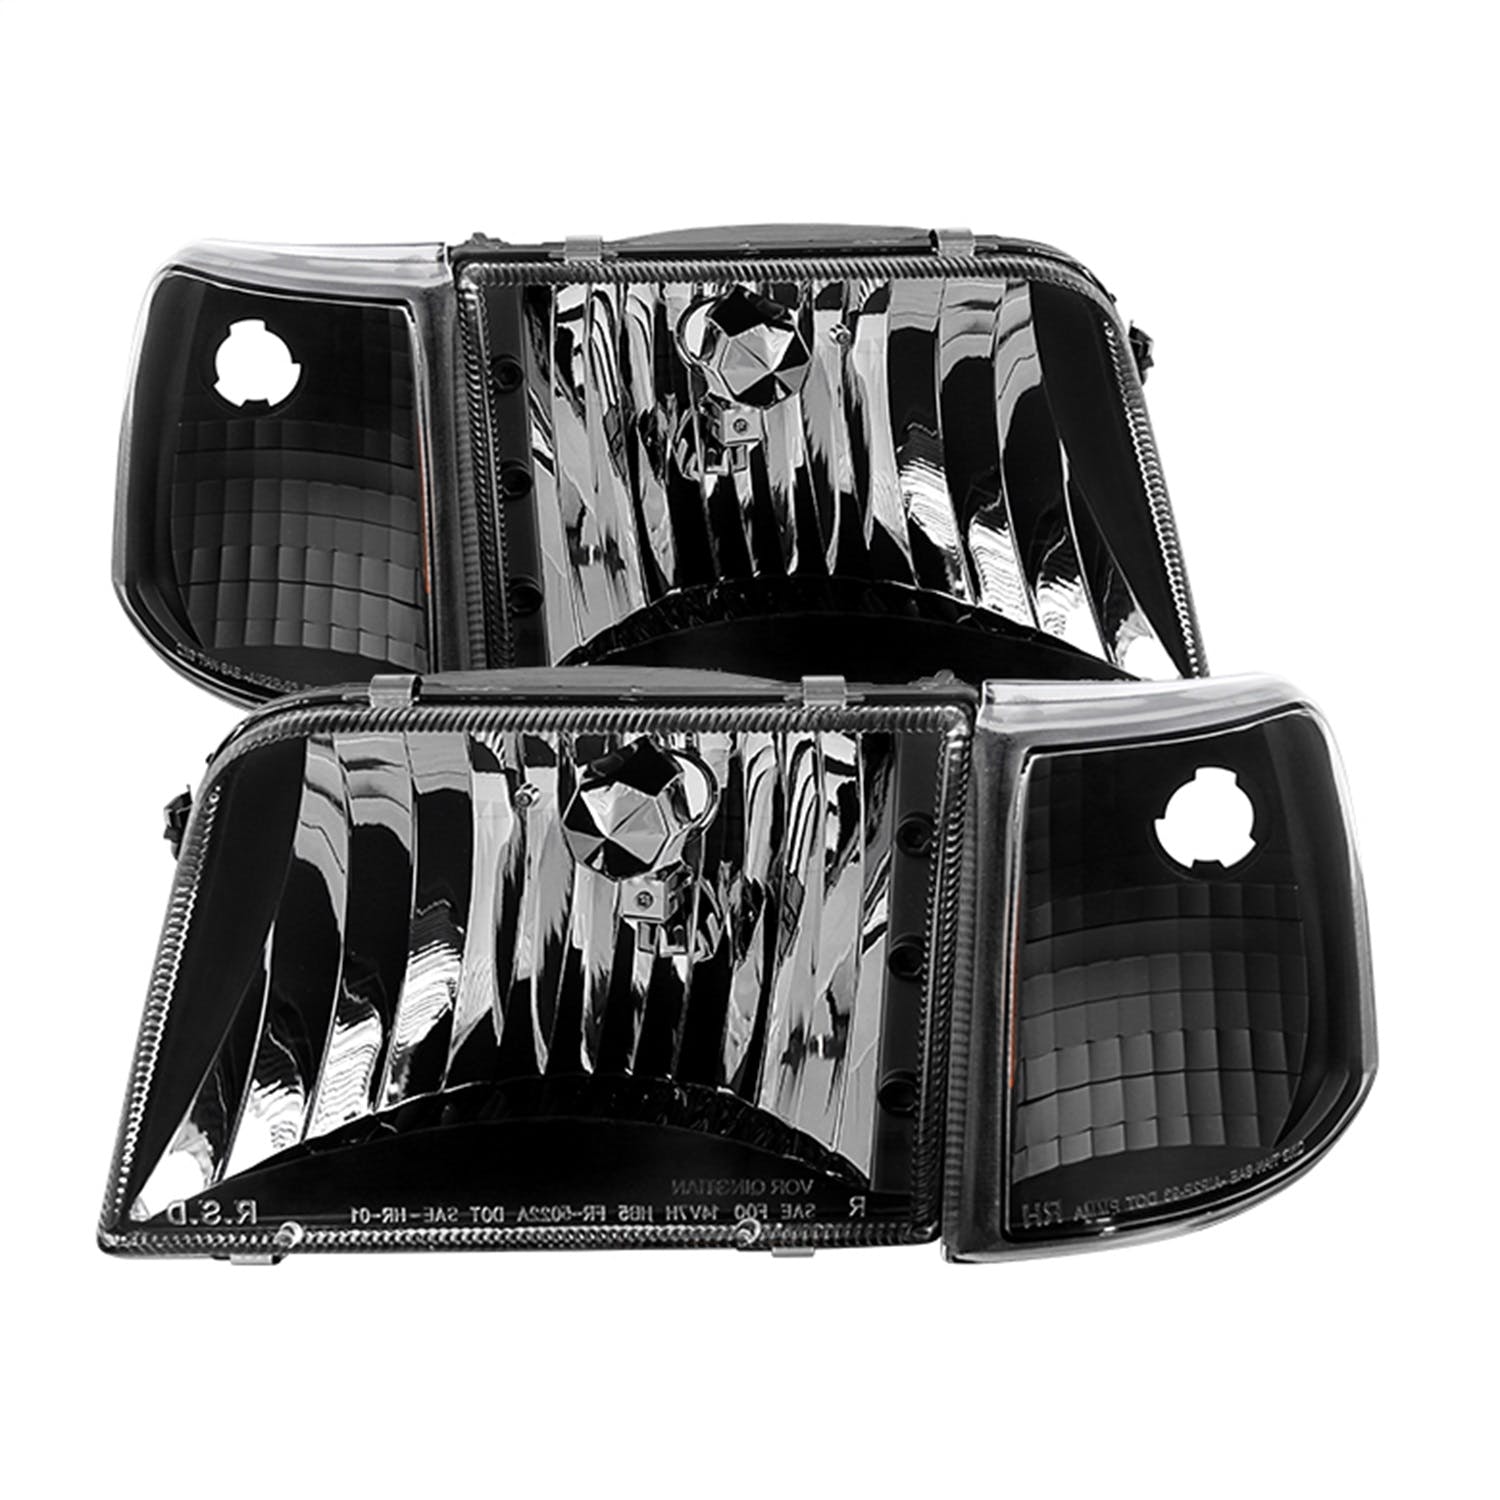 XTUNE POWER 9029363 Ford Ranger 93 97 Crystal Headlights With Corner Lights 4pcs sets Black